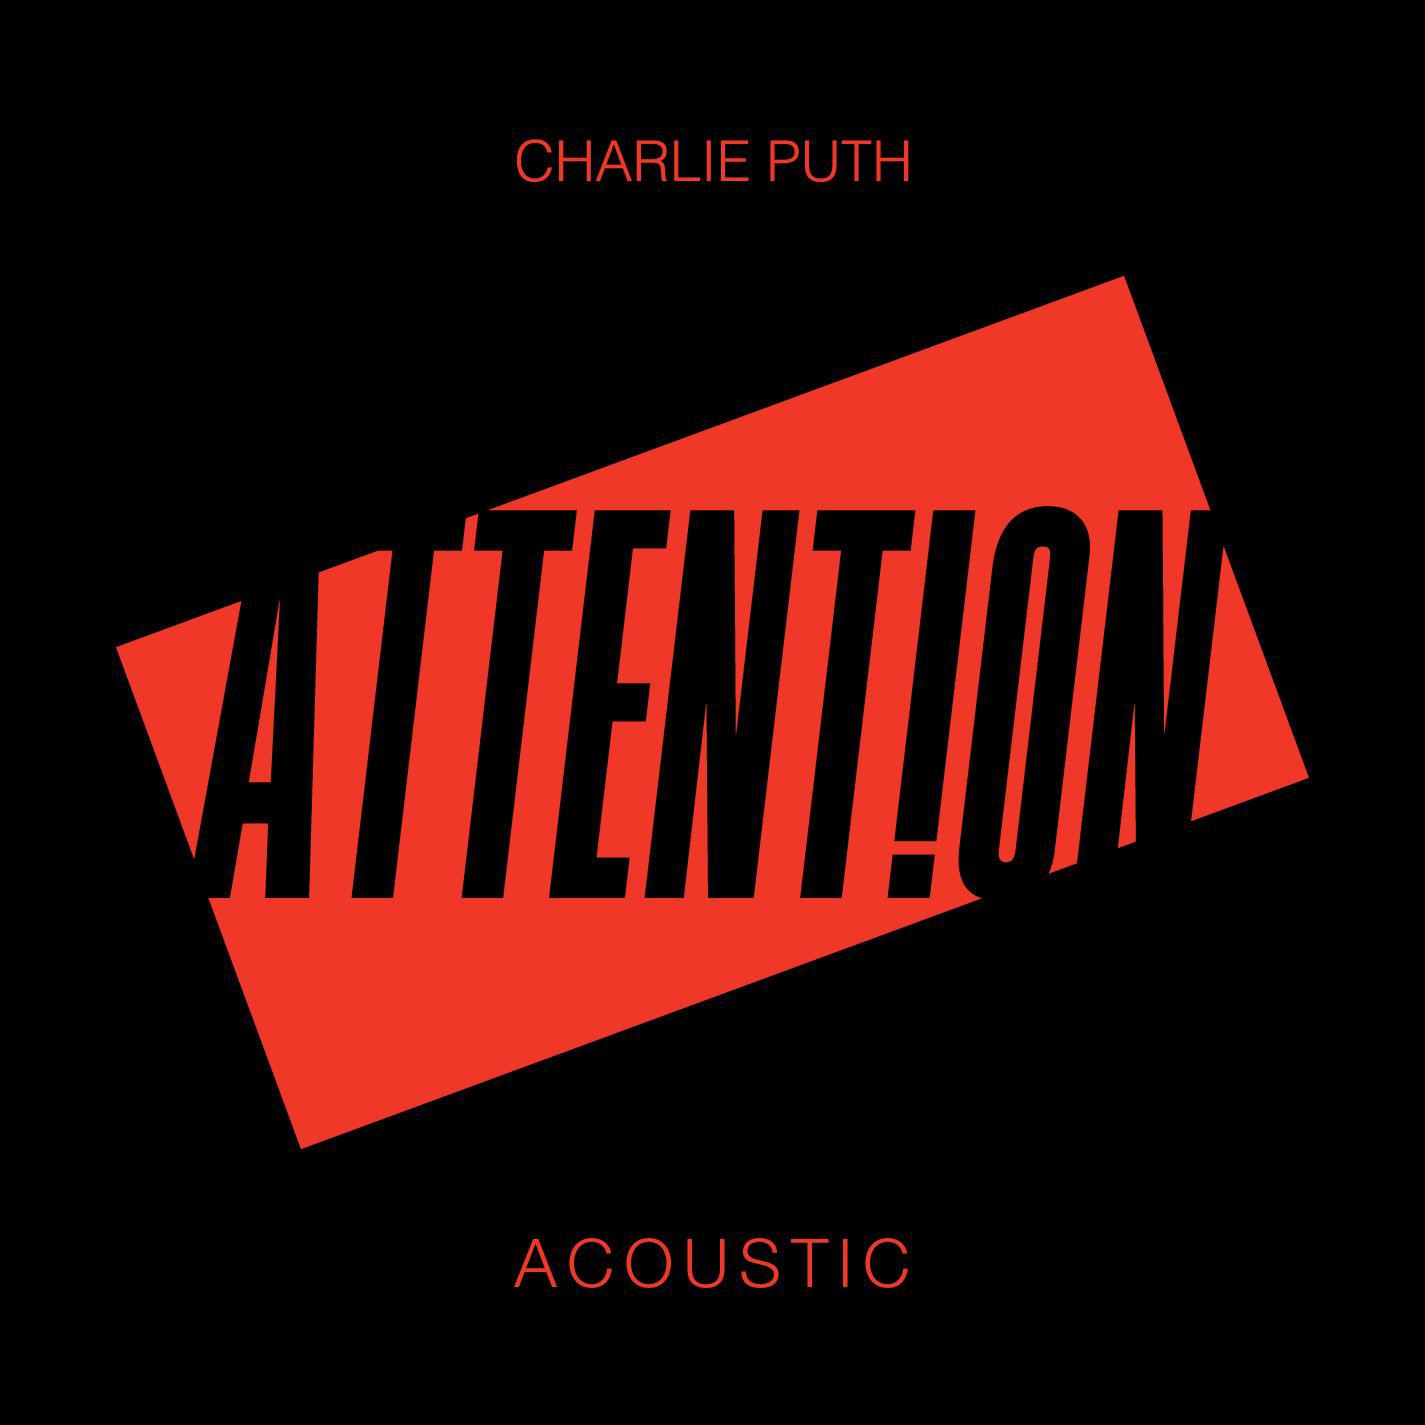 Attention (Acoustic)专辑